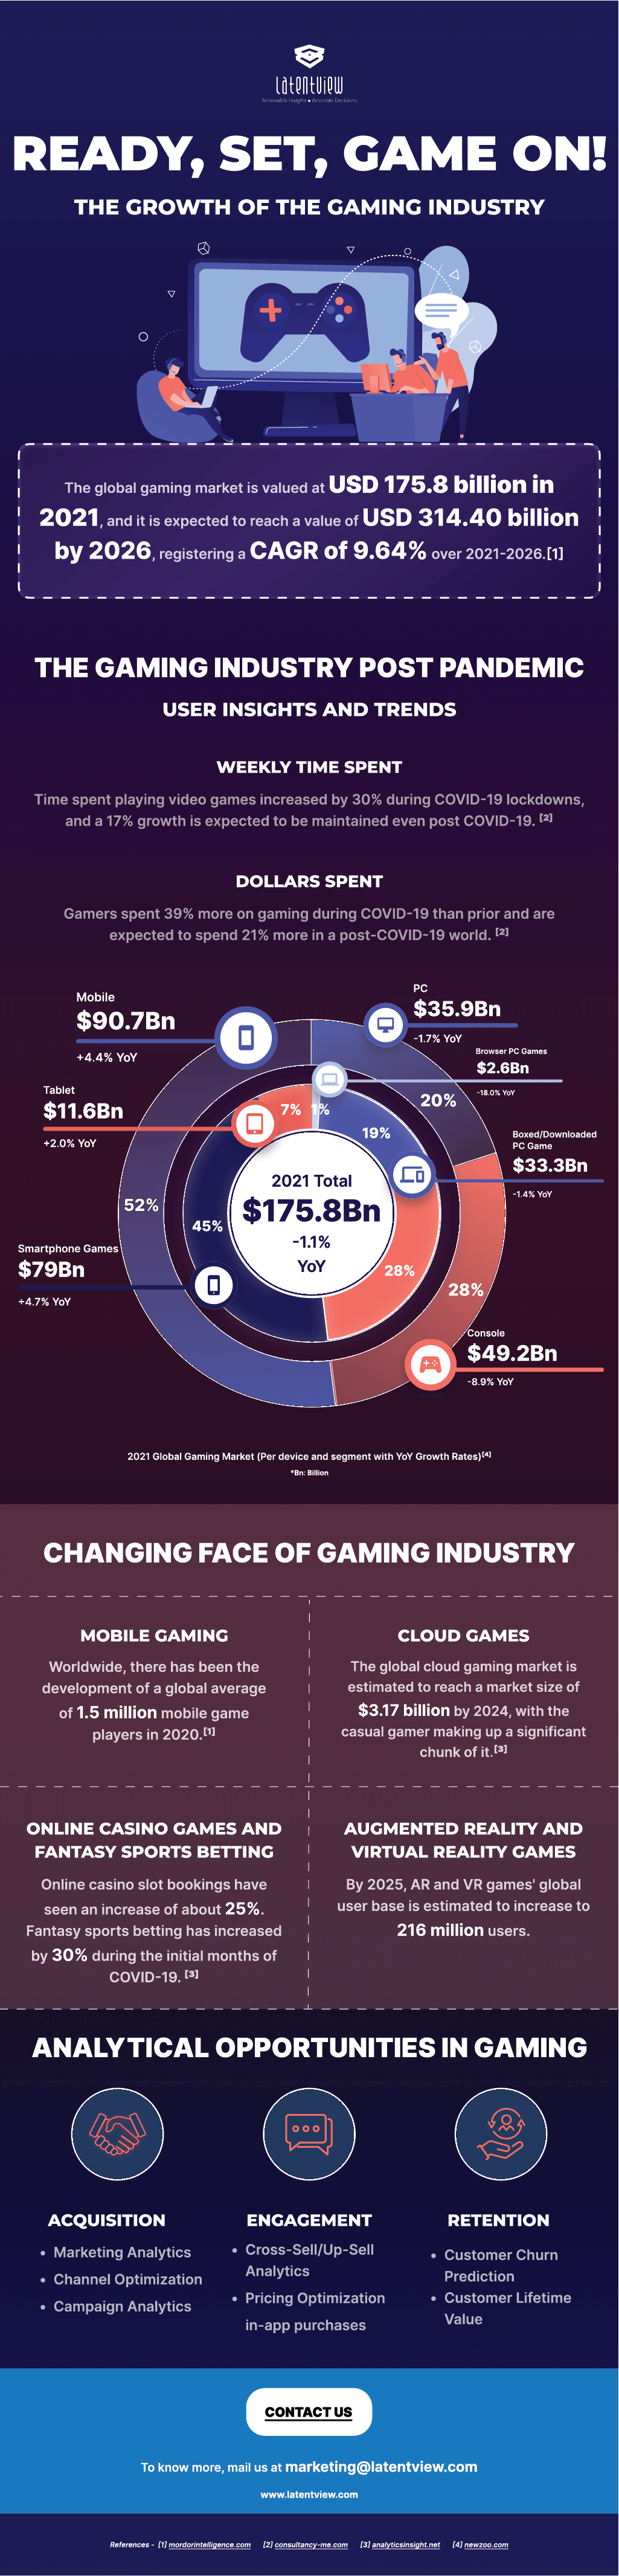 The Growth of the Gaming Industry img